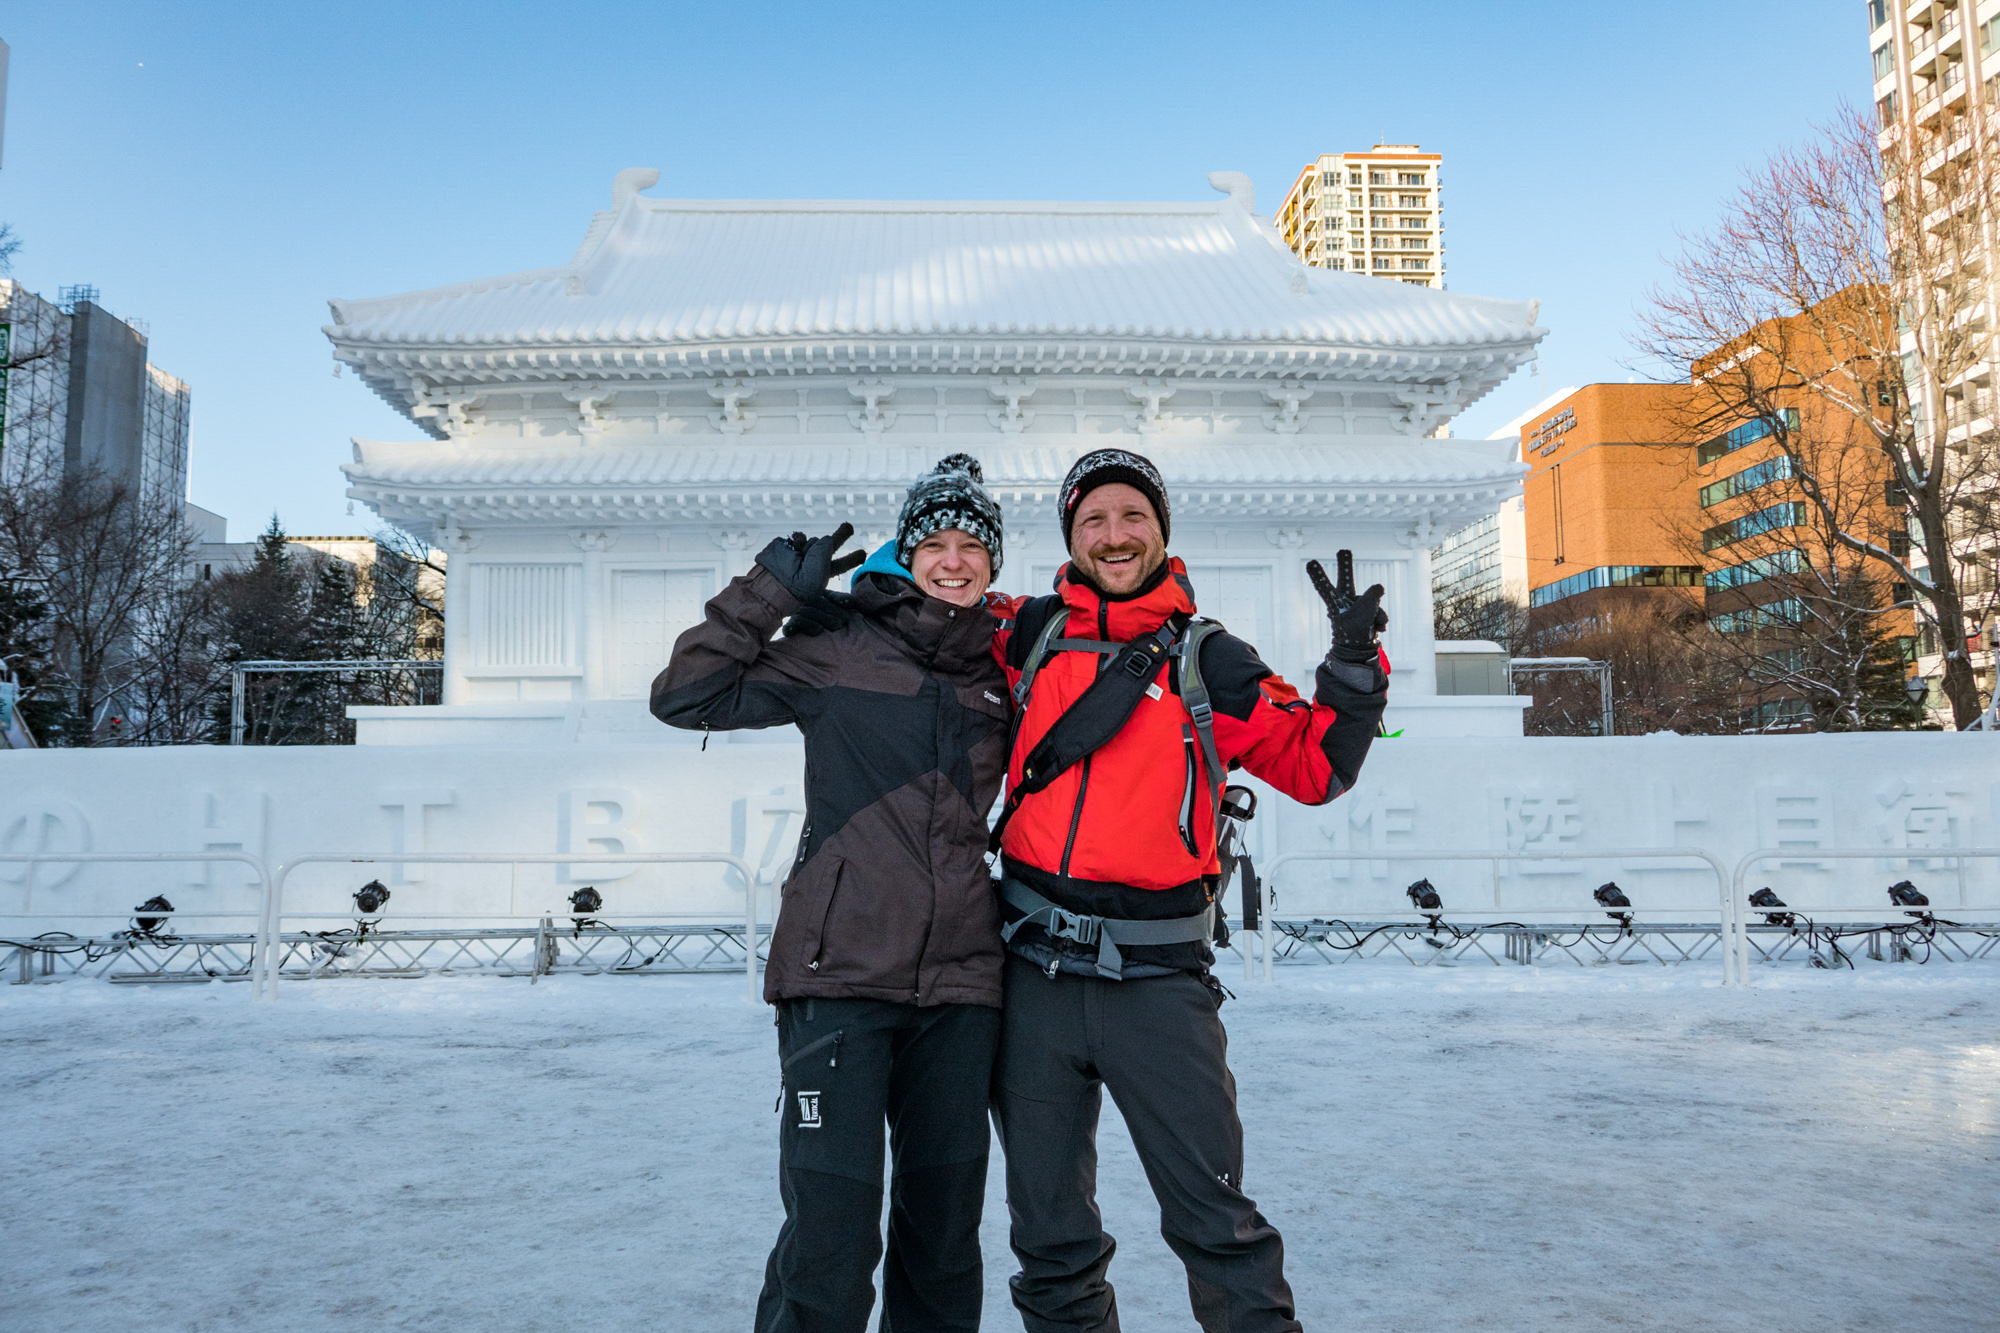 us in front of a huge snow temple at the Sapporo Snow and Ice Festival